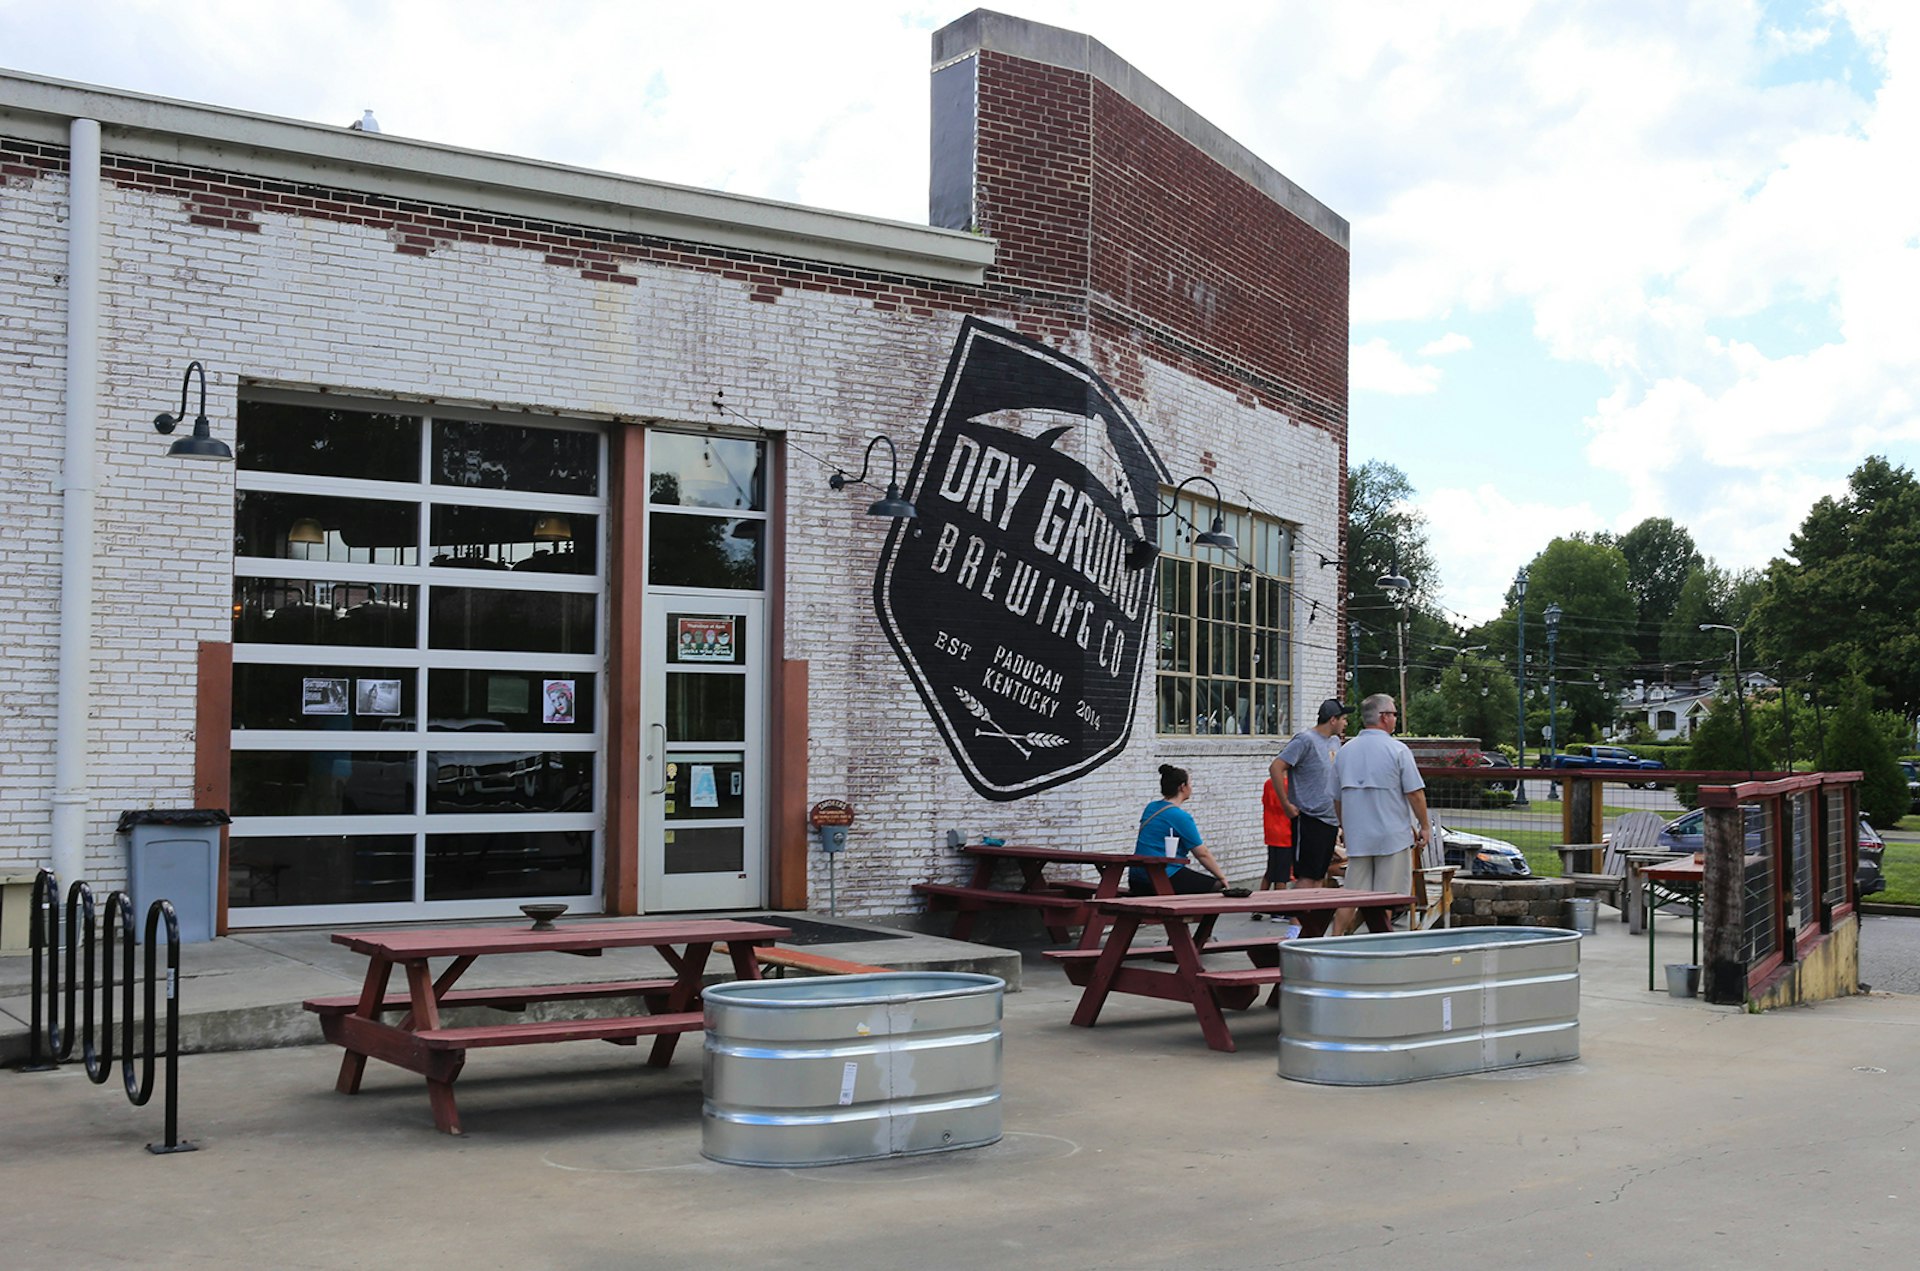 Exterior view of old industrial building reconfigured into a brewery on a partly cloudy day